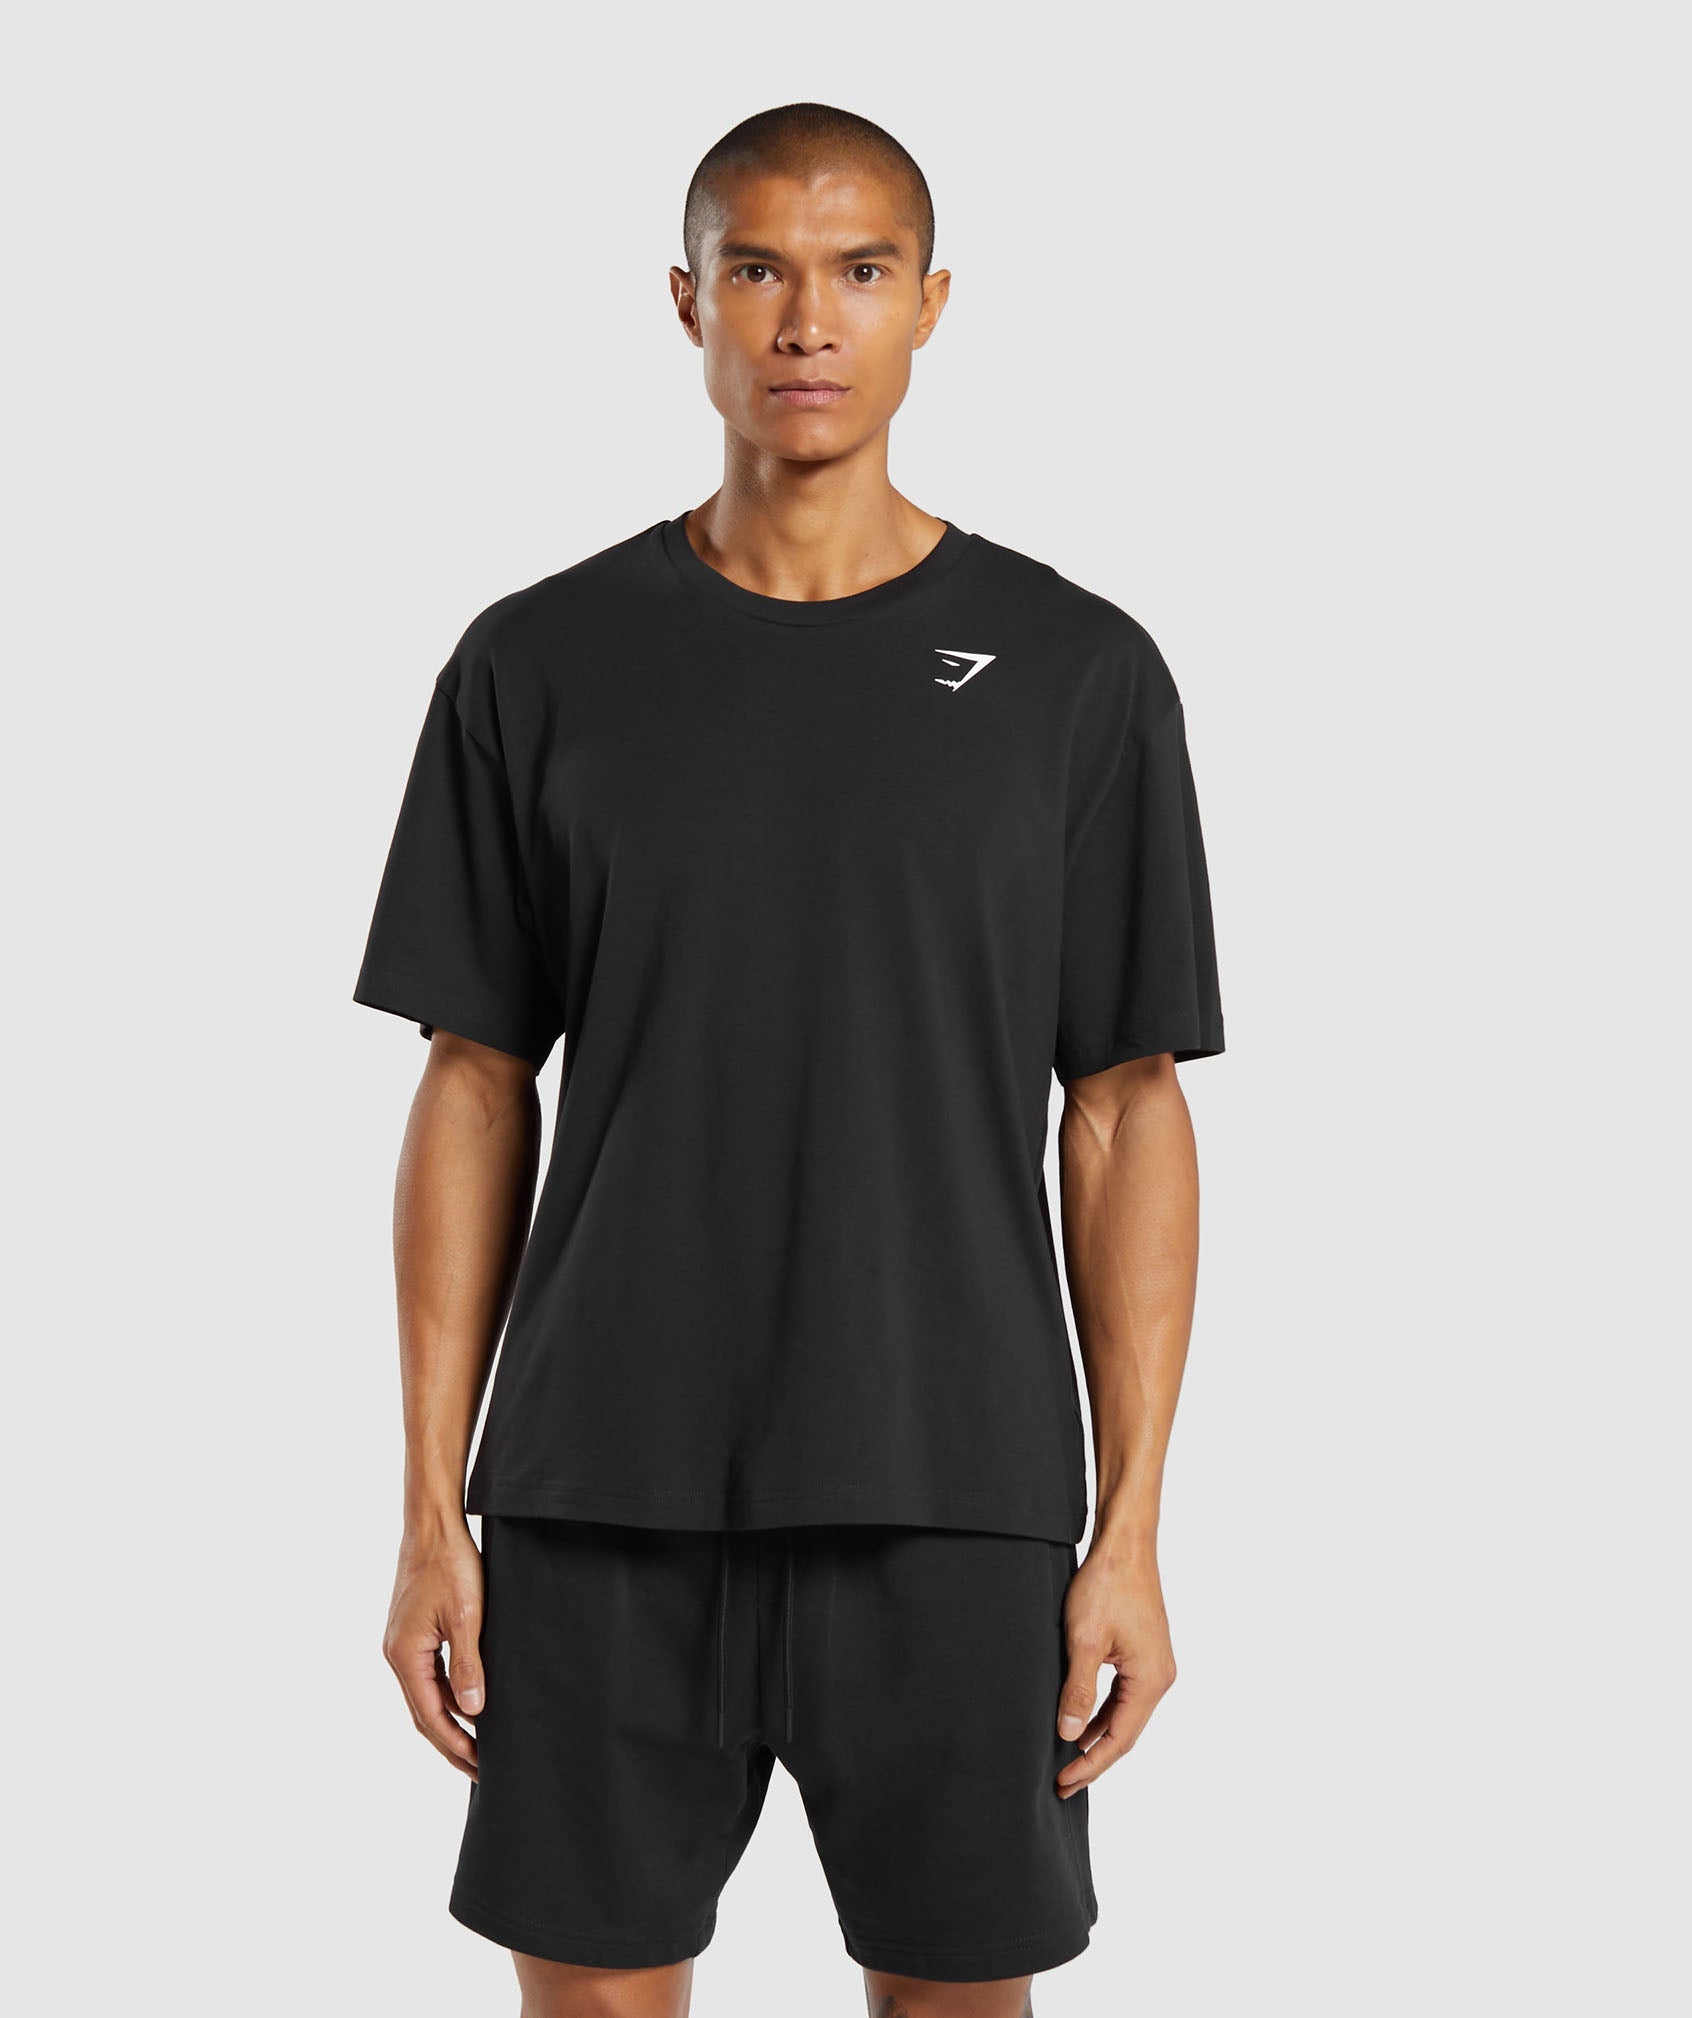 Essential Oversized T-Shirt in Black is out of stock